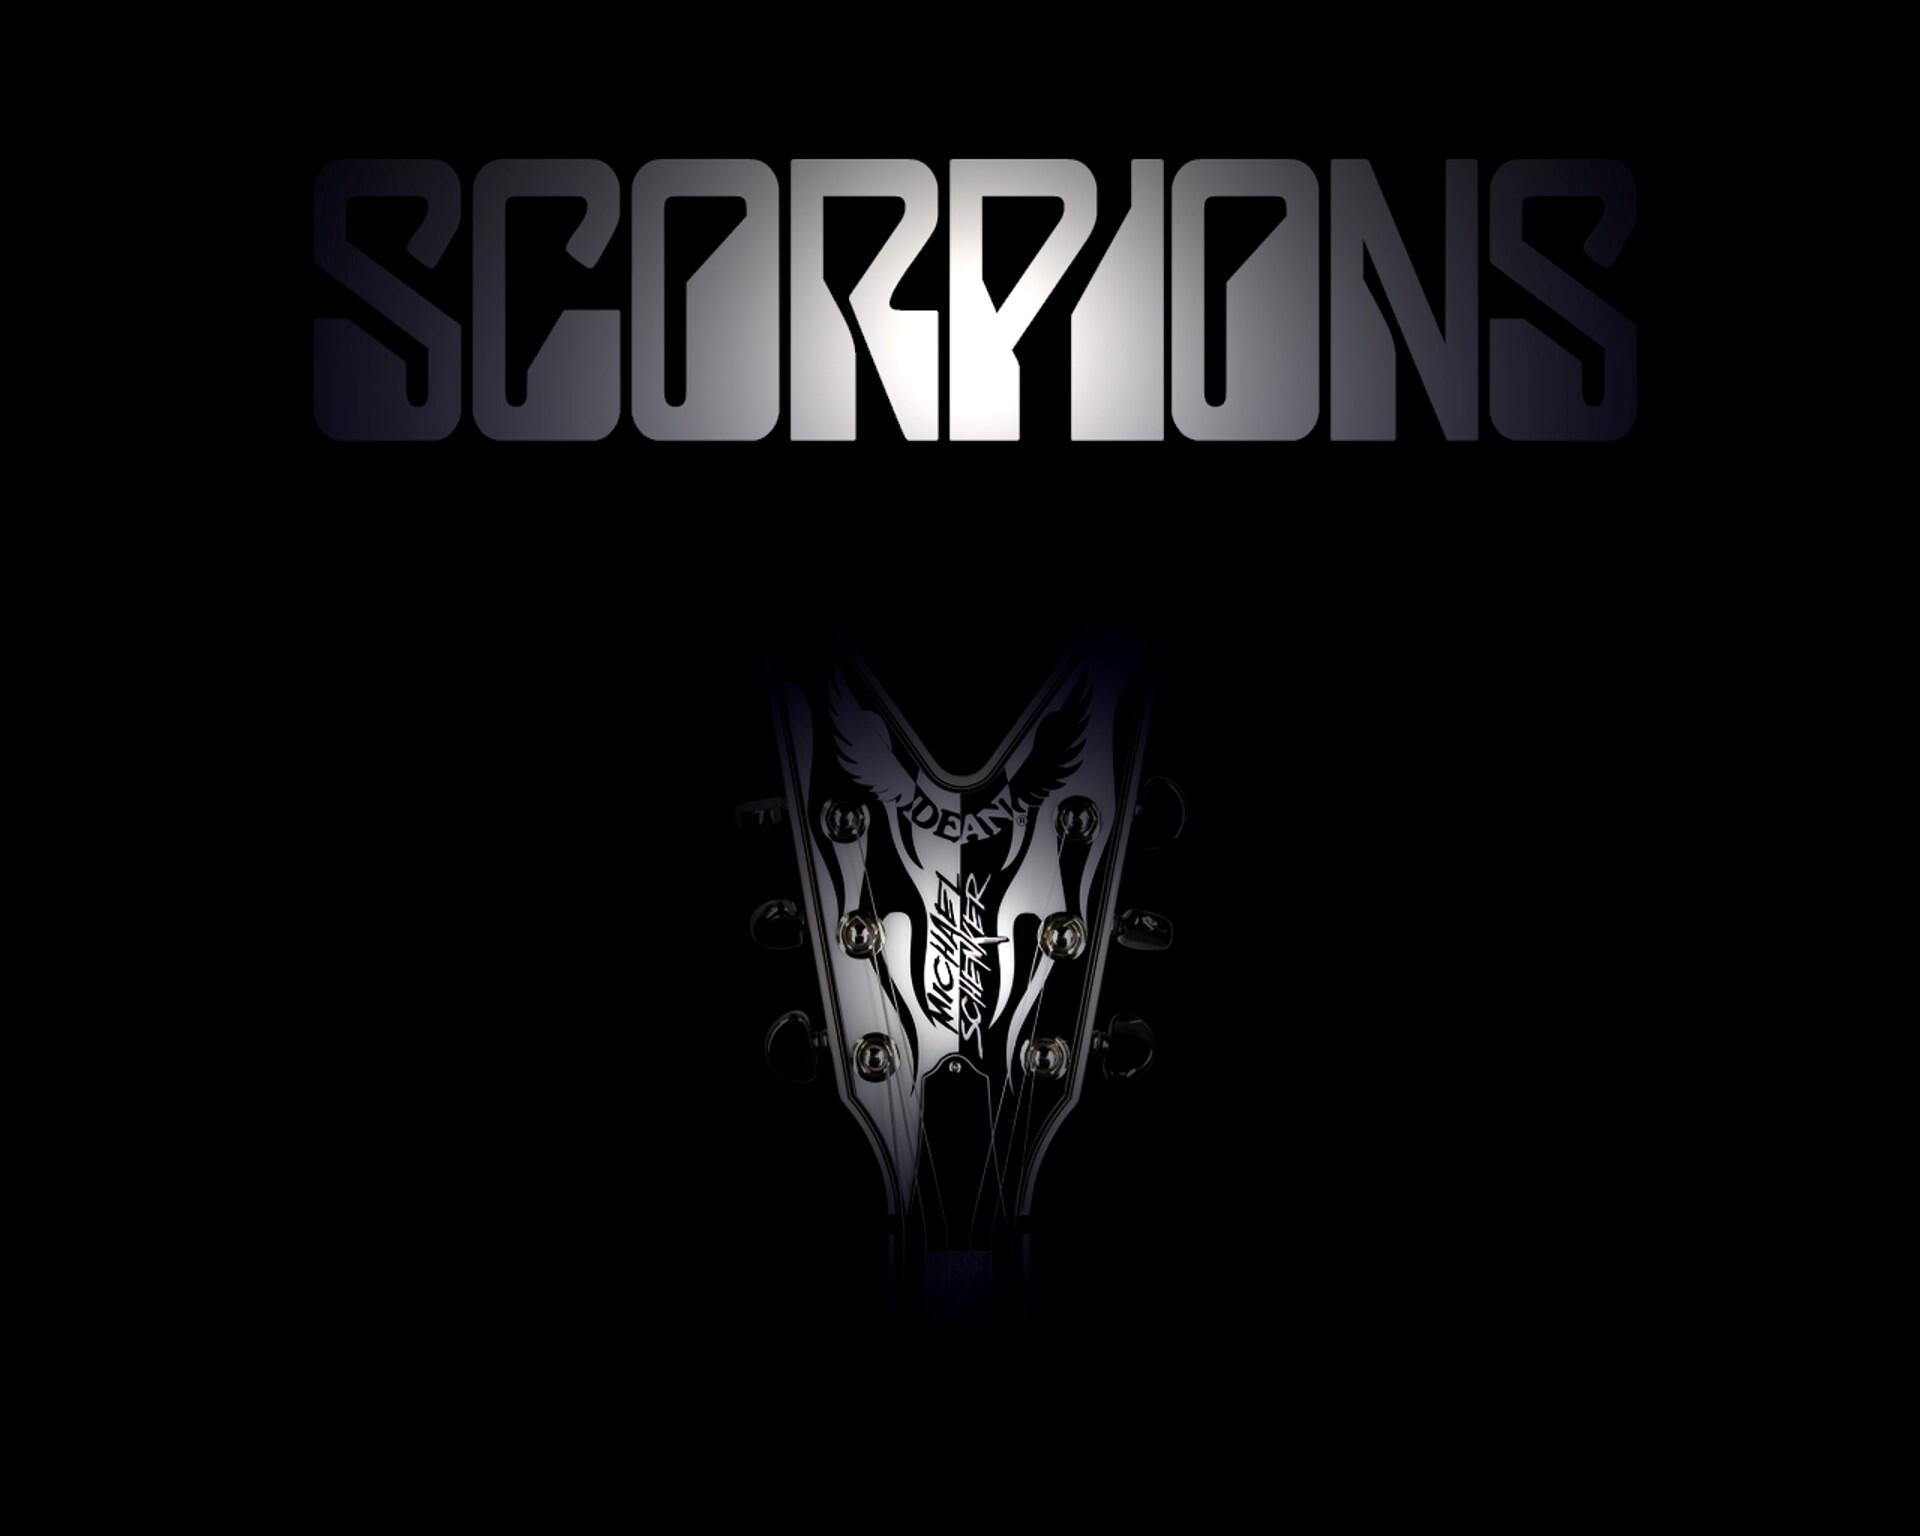 Scorpions wallpaper, Download for free, Band's artwork, High-resolution wallpapers, 1920x1540 HD Desktop